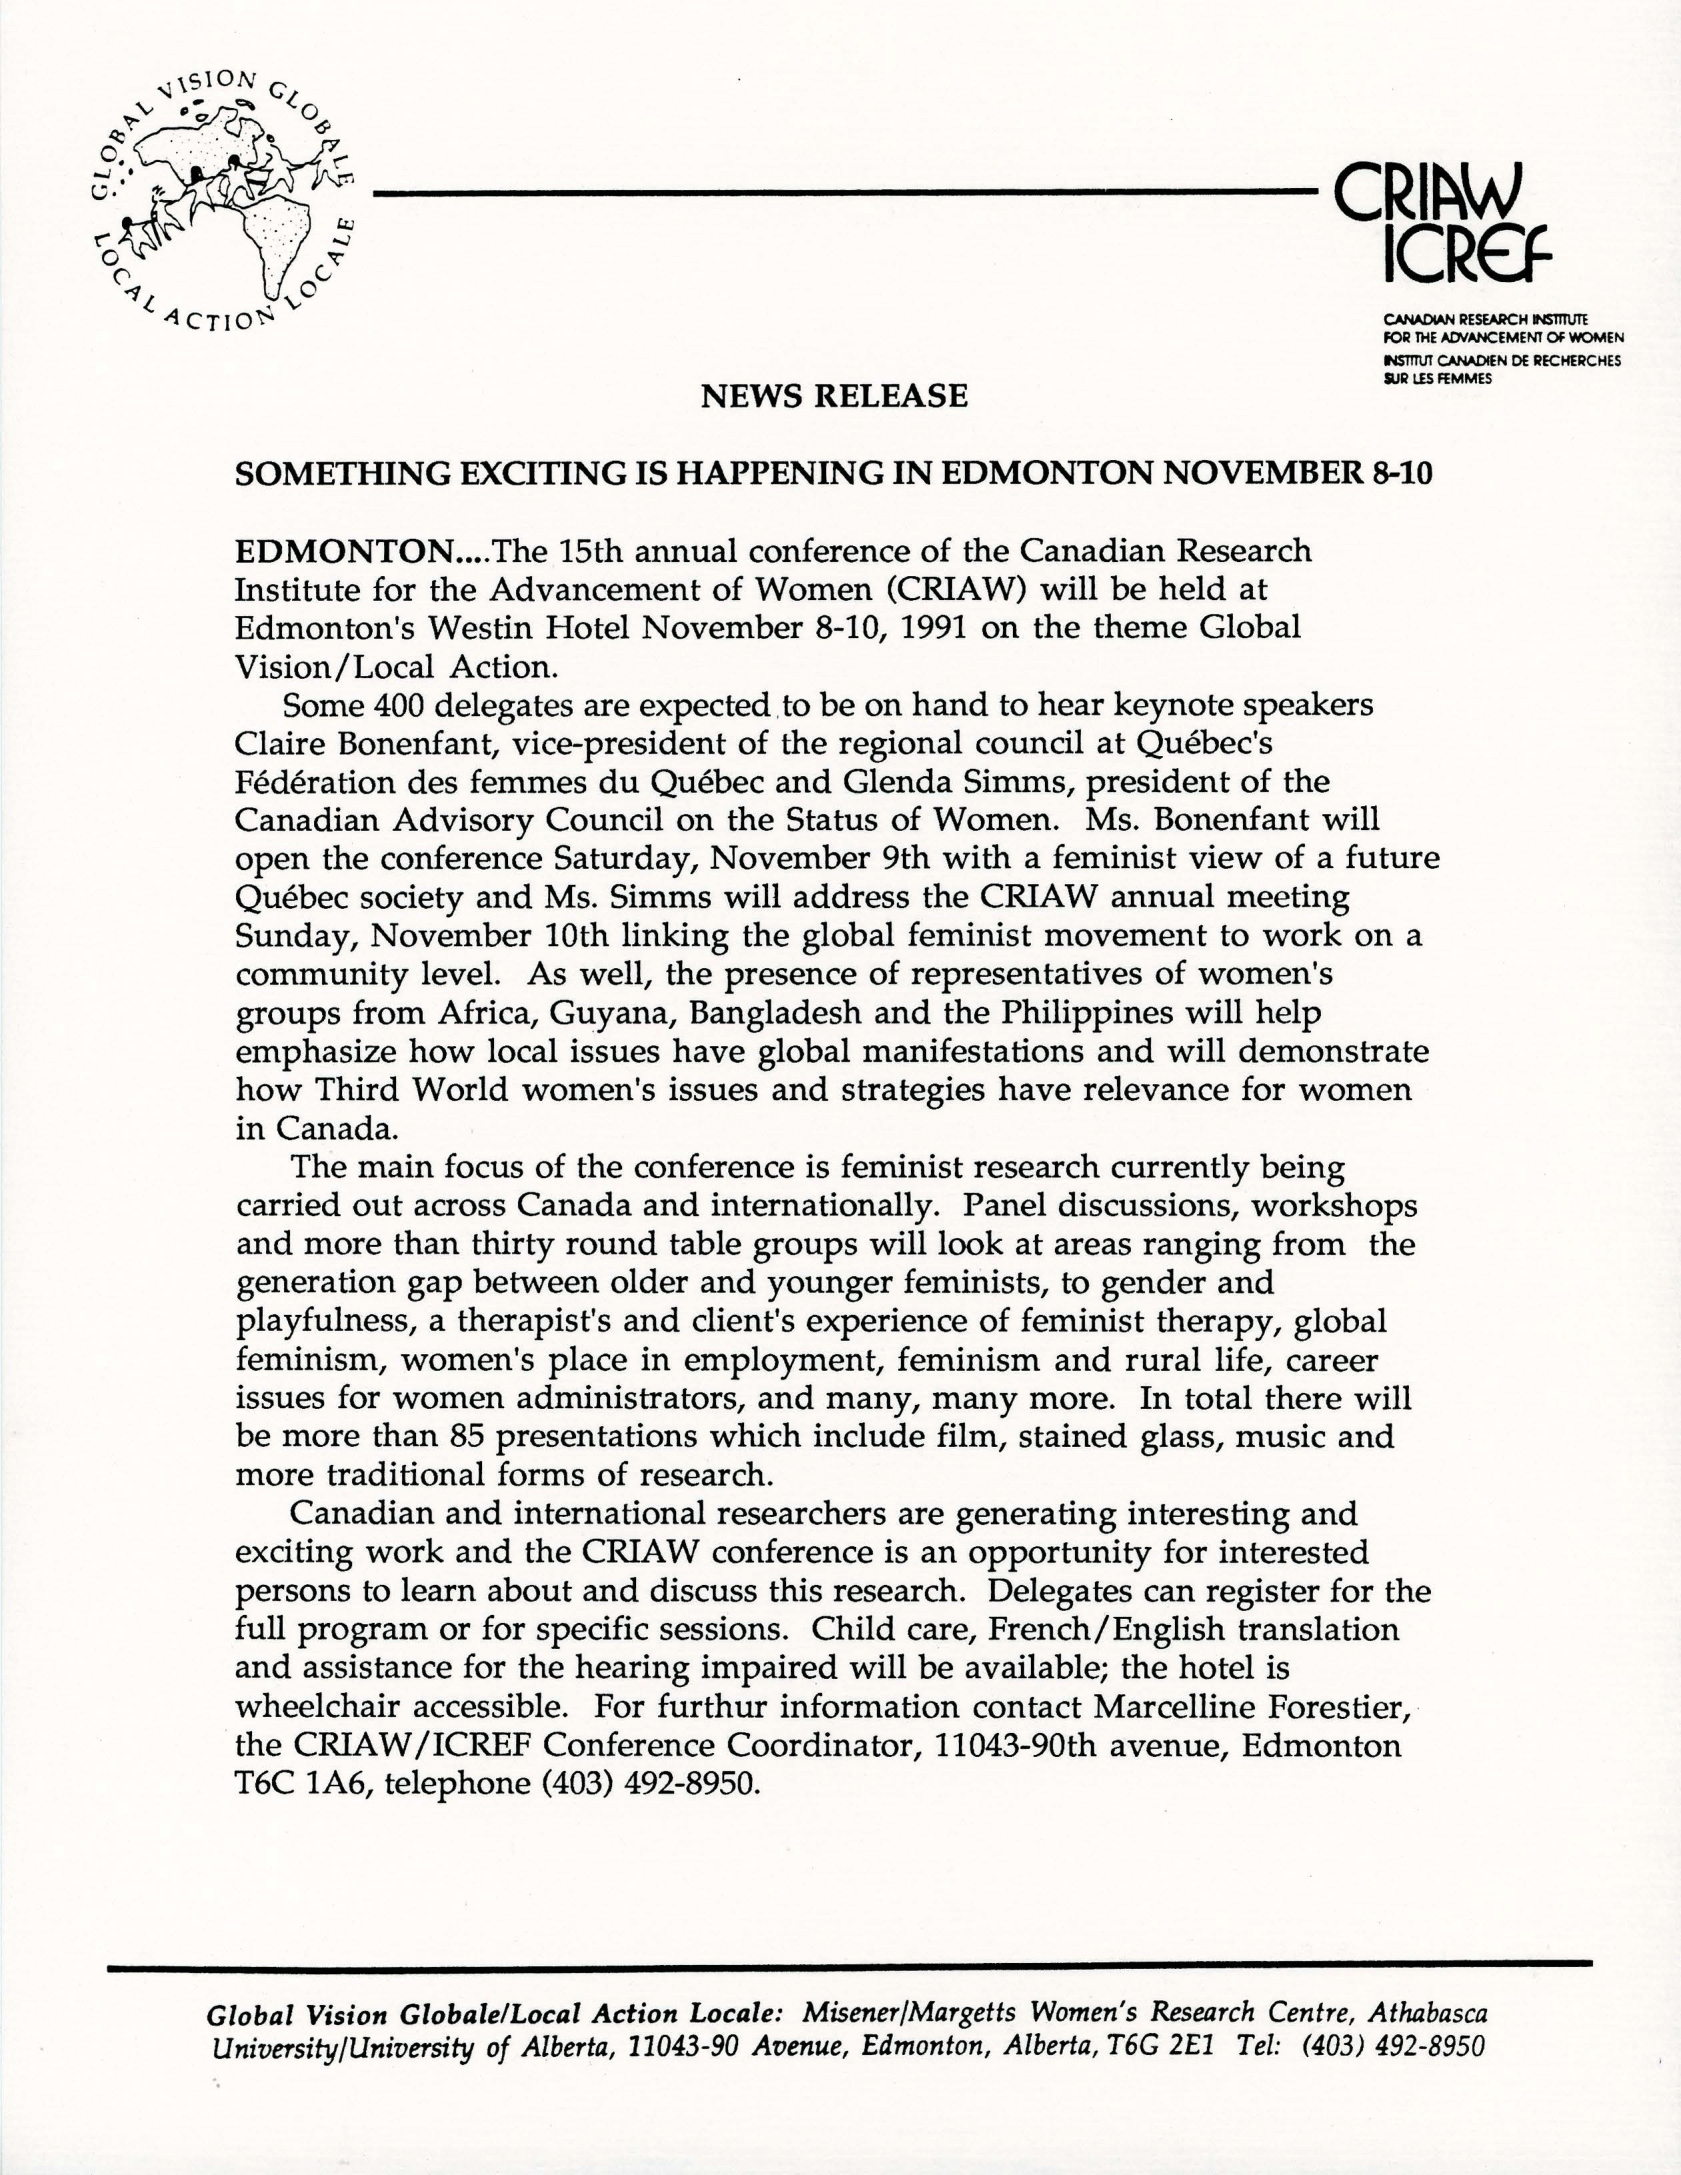 A news release promoting the 1991 CRIAW conference